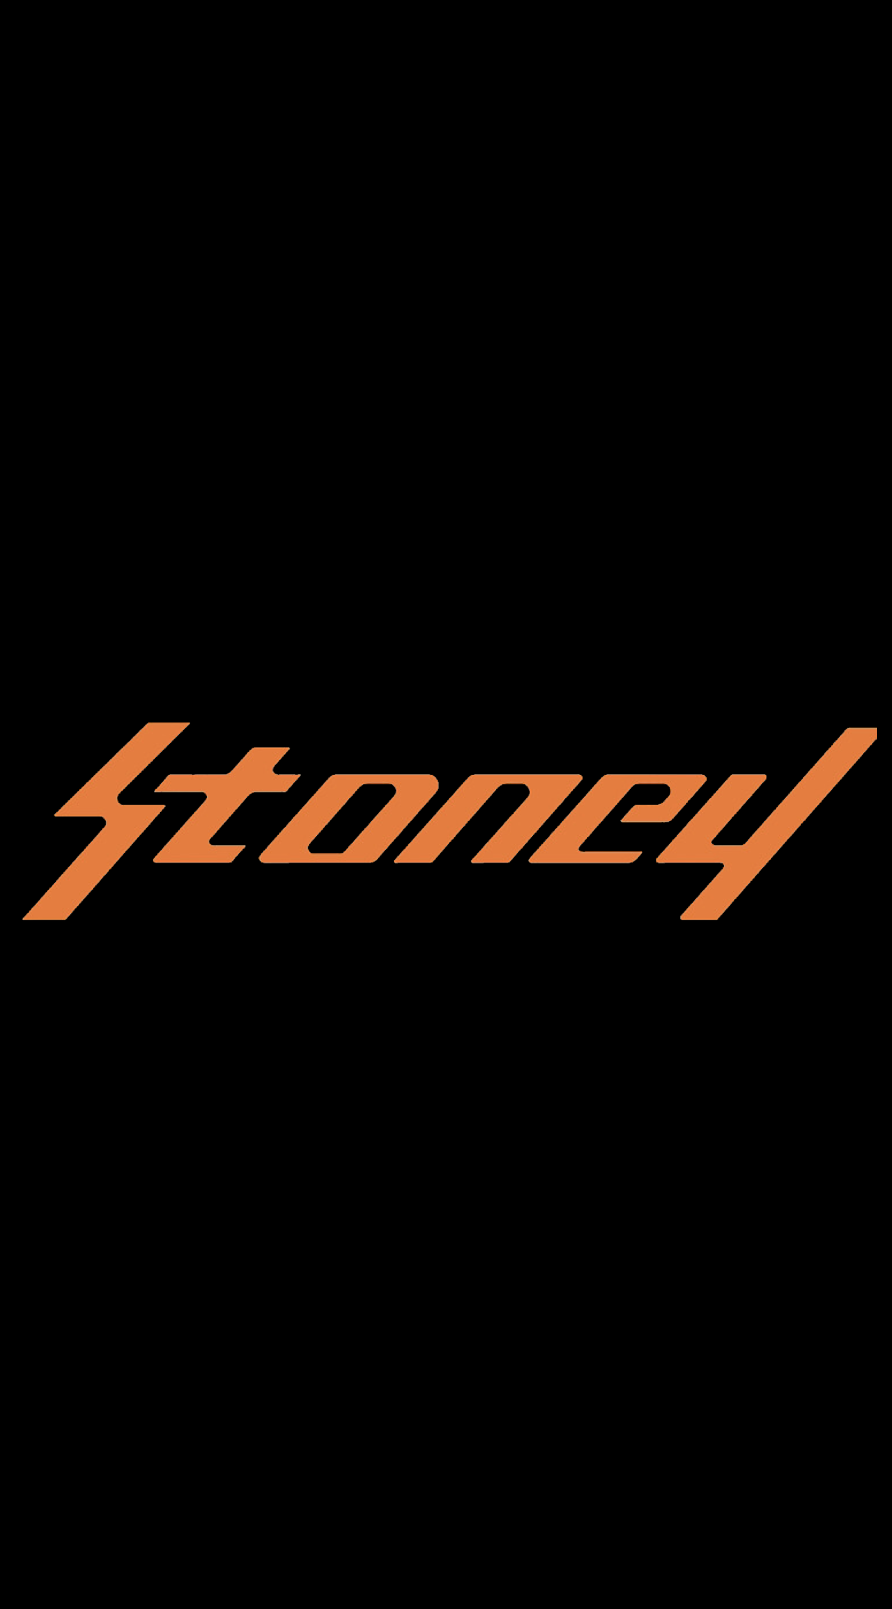 Stoney Wallpapers